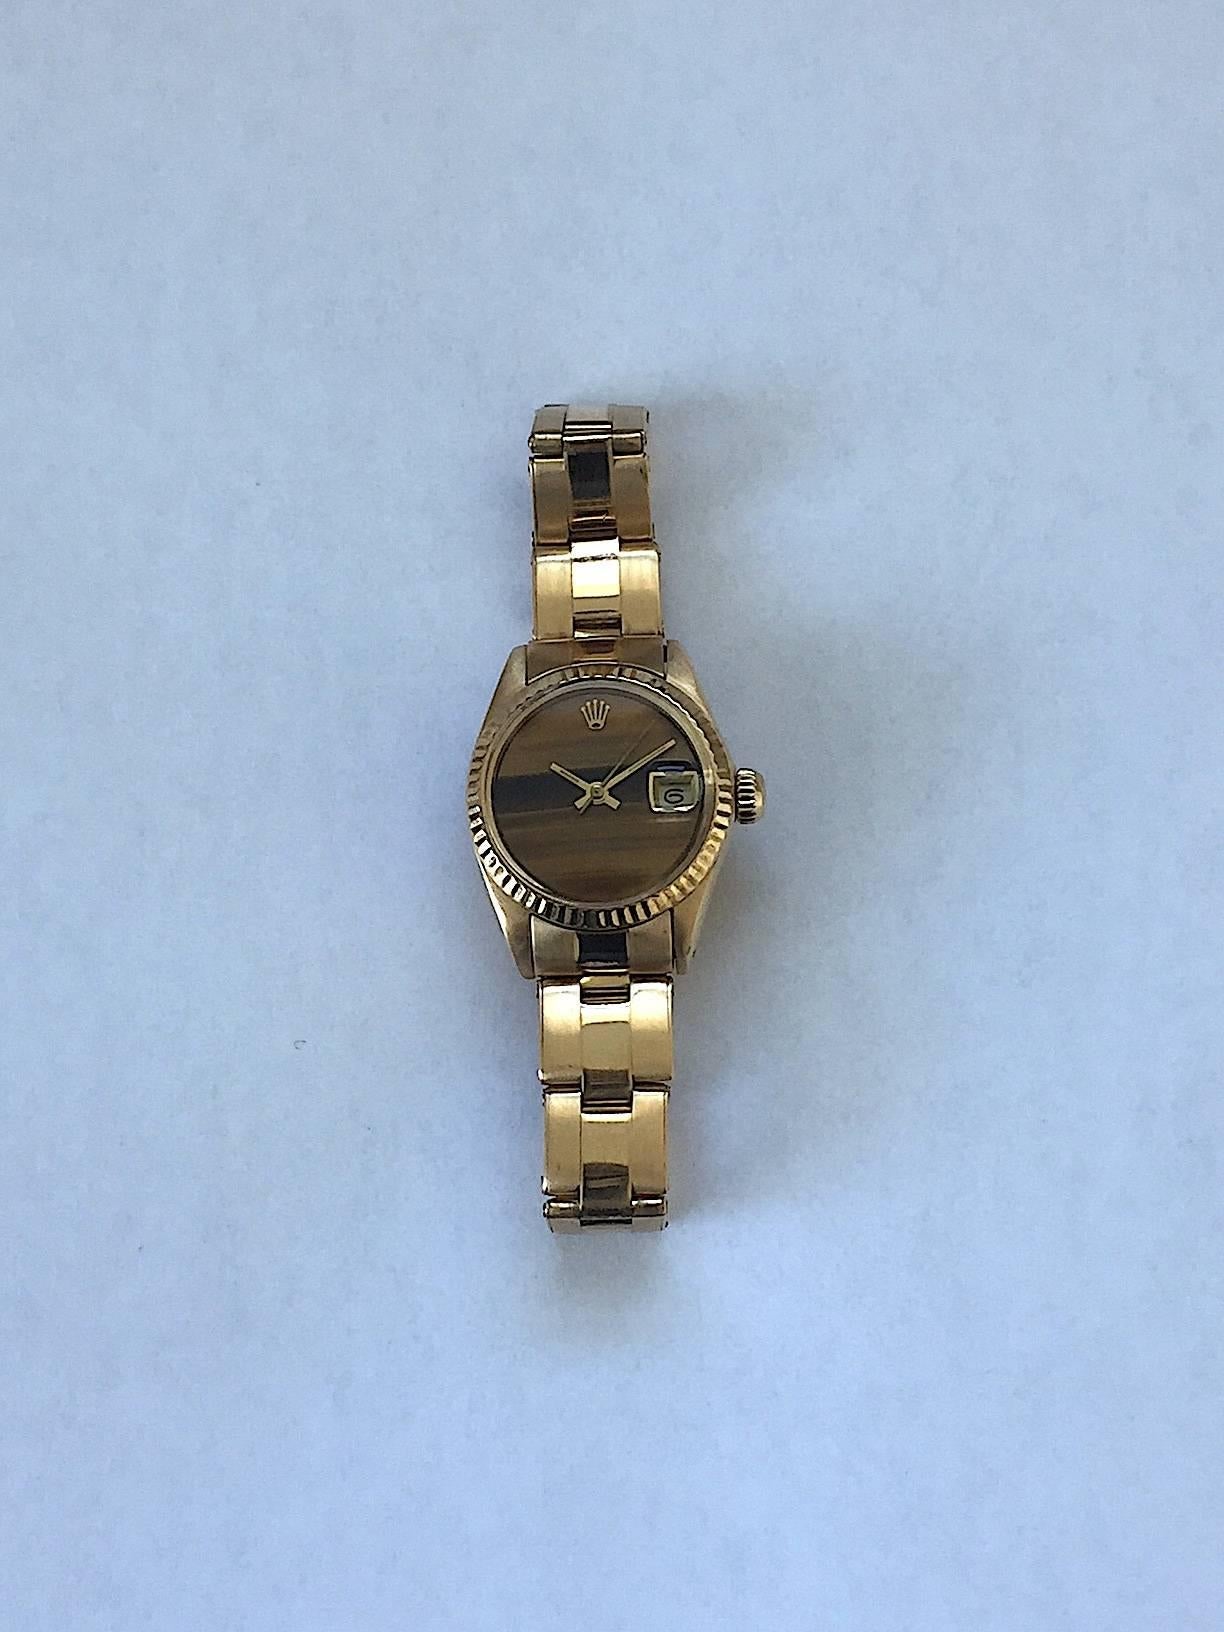 Rolex 18K Yellow Gold Ladies Datejust Watch 
Rare Factory Tiger's Eye Quartz Dial with Applied Rolex Logo
Yellow Gold Gold Fluted Bezel
18K Yellow Gold Case
26mm in size 
Features Rolex Automatic Movement with Non-Quick Set Date Function
Acrylic